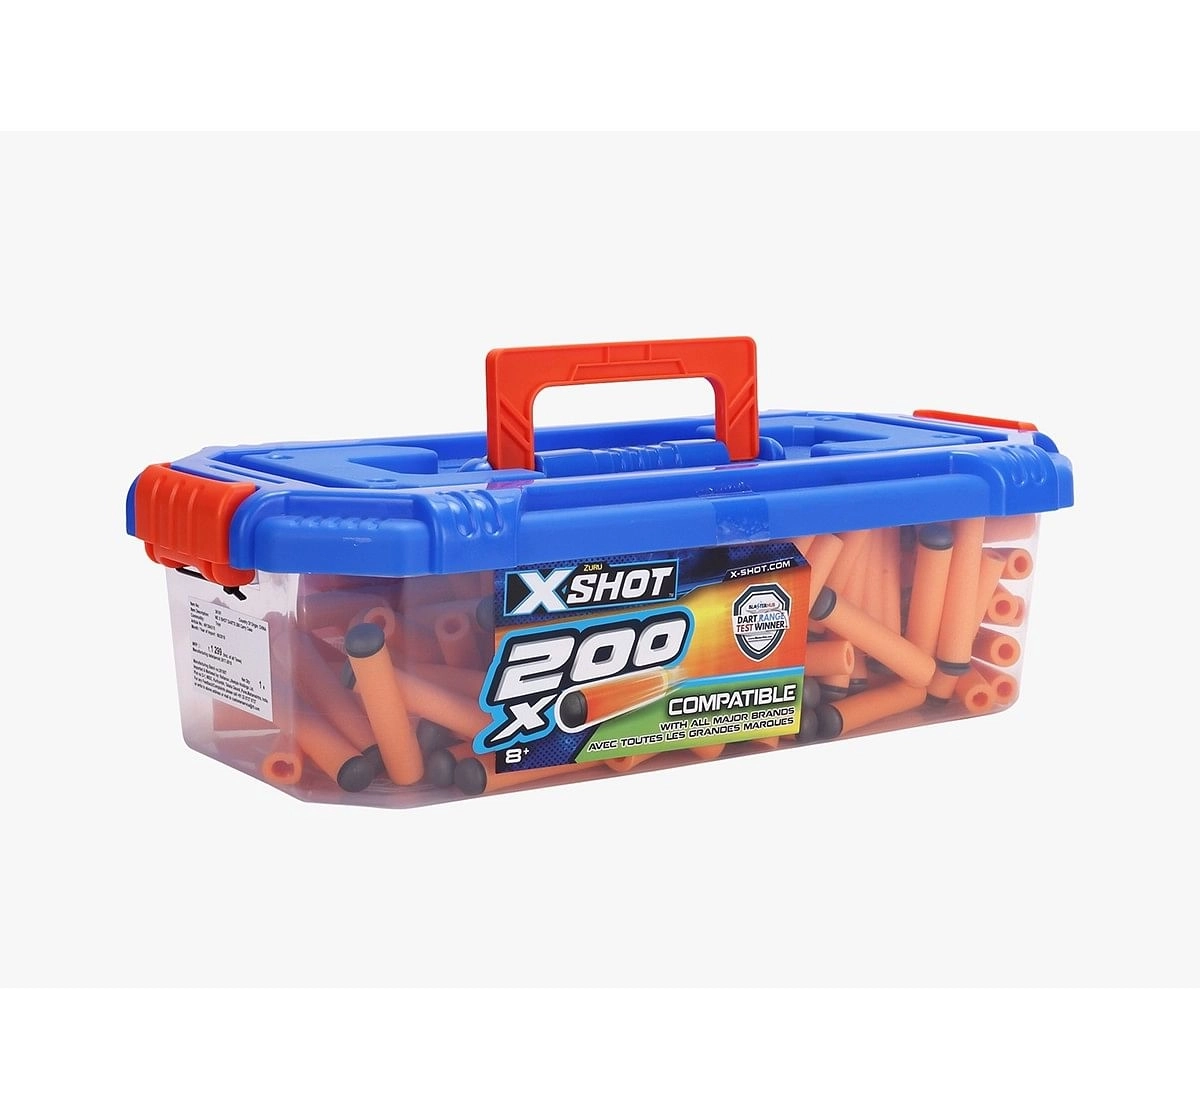 X-Shot 200 Darts Refill with Carry Case Target Games  for Kids age 8Y+ (Orange)